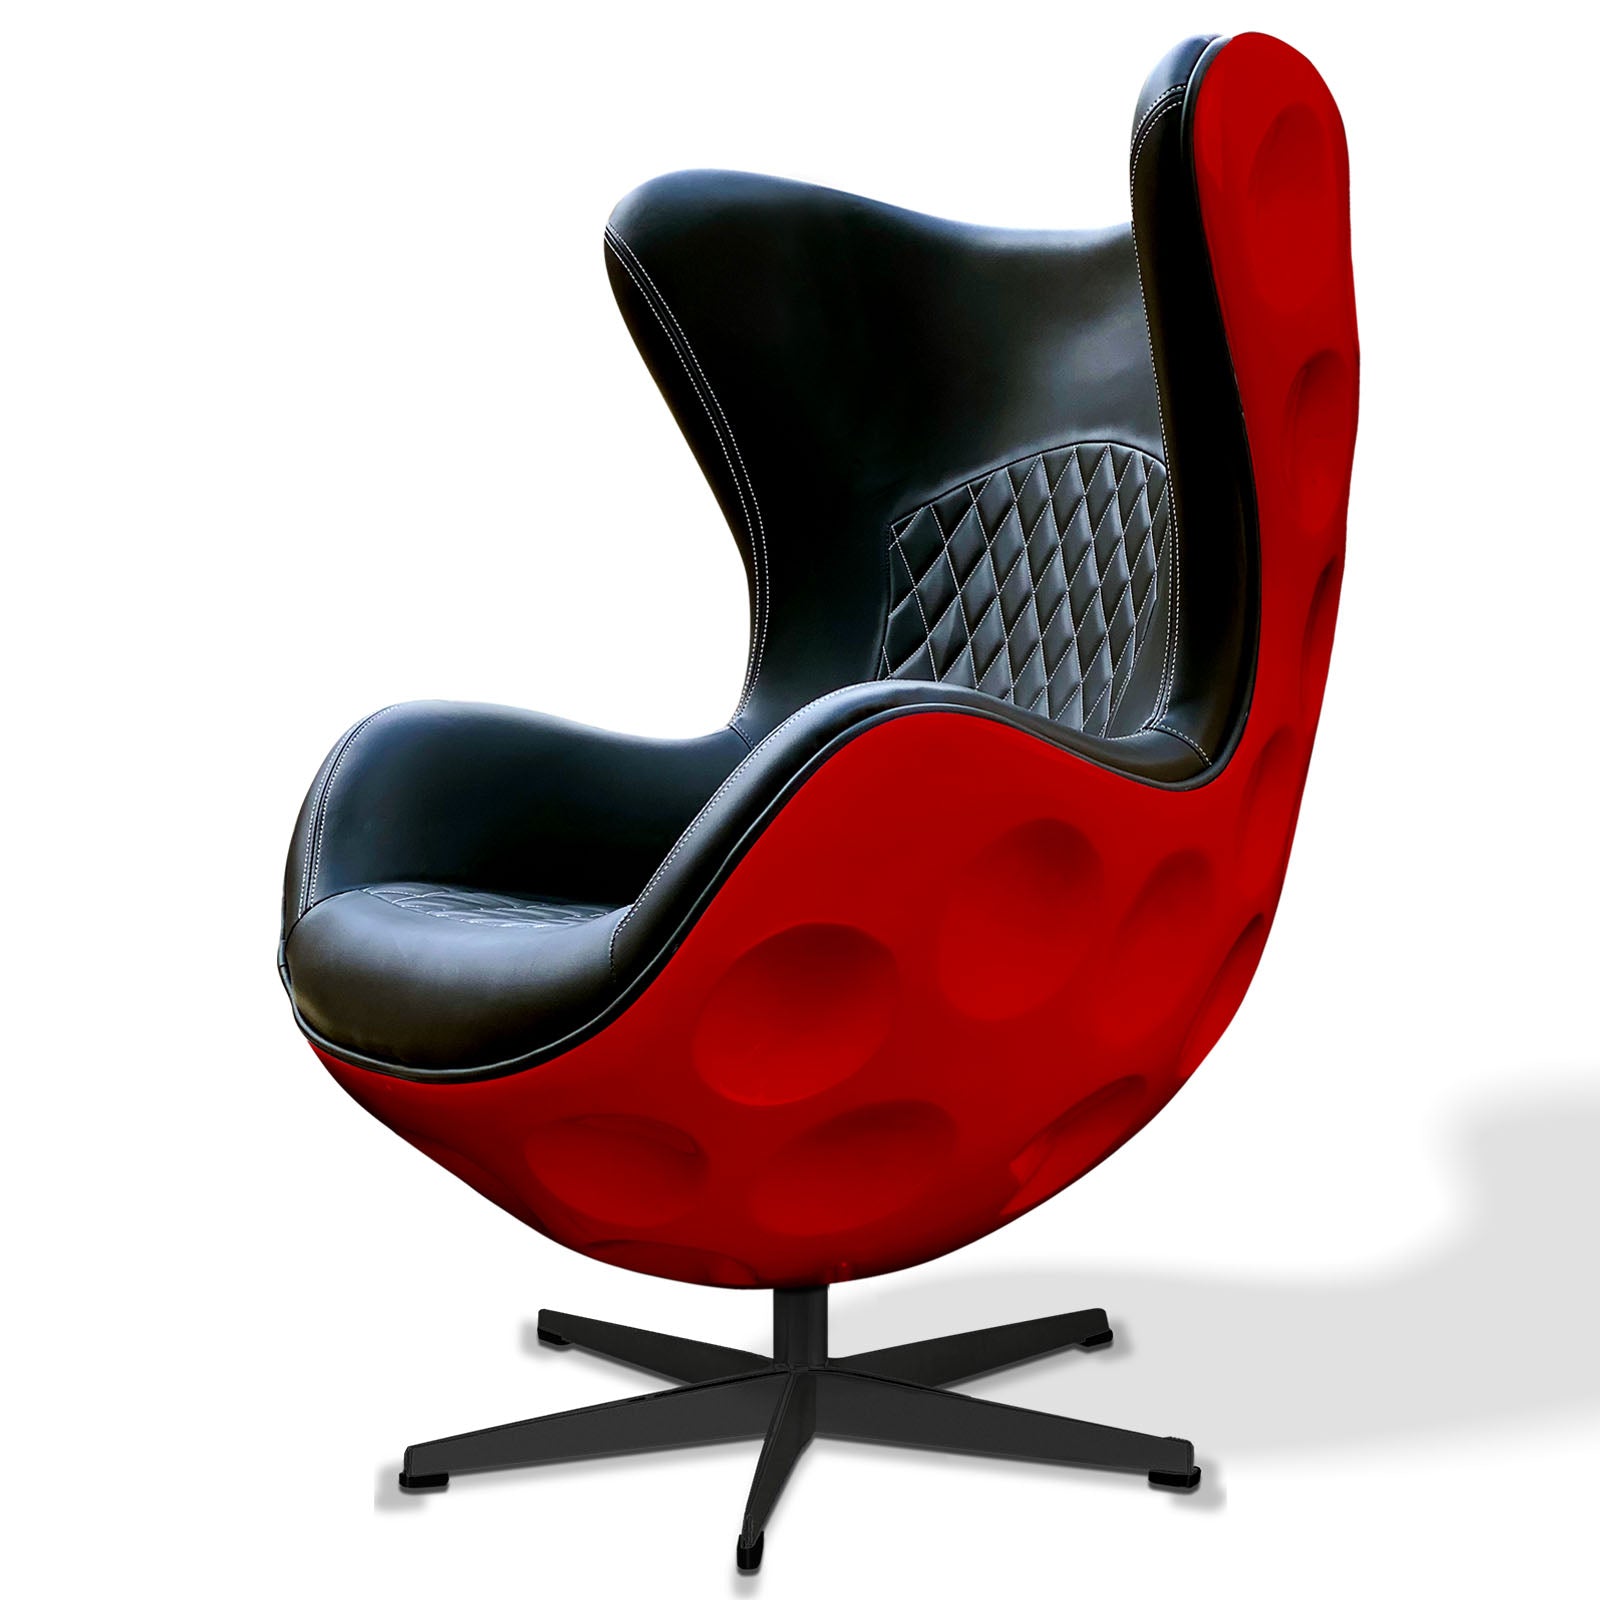 dimple designed-usa-tiger-red-golf-ball-chair-close-up